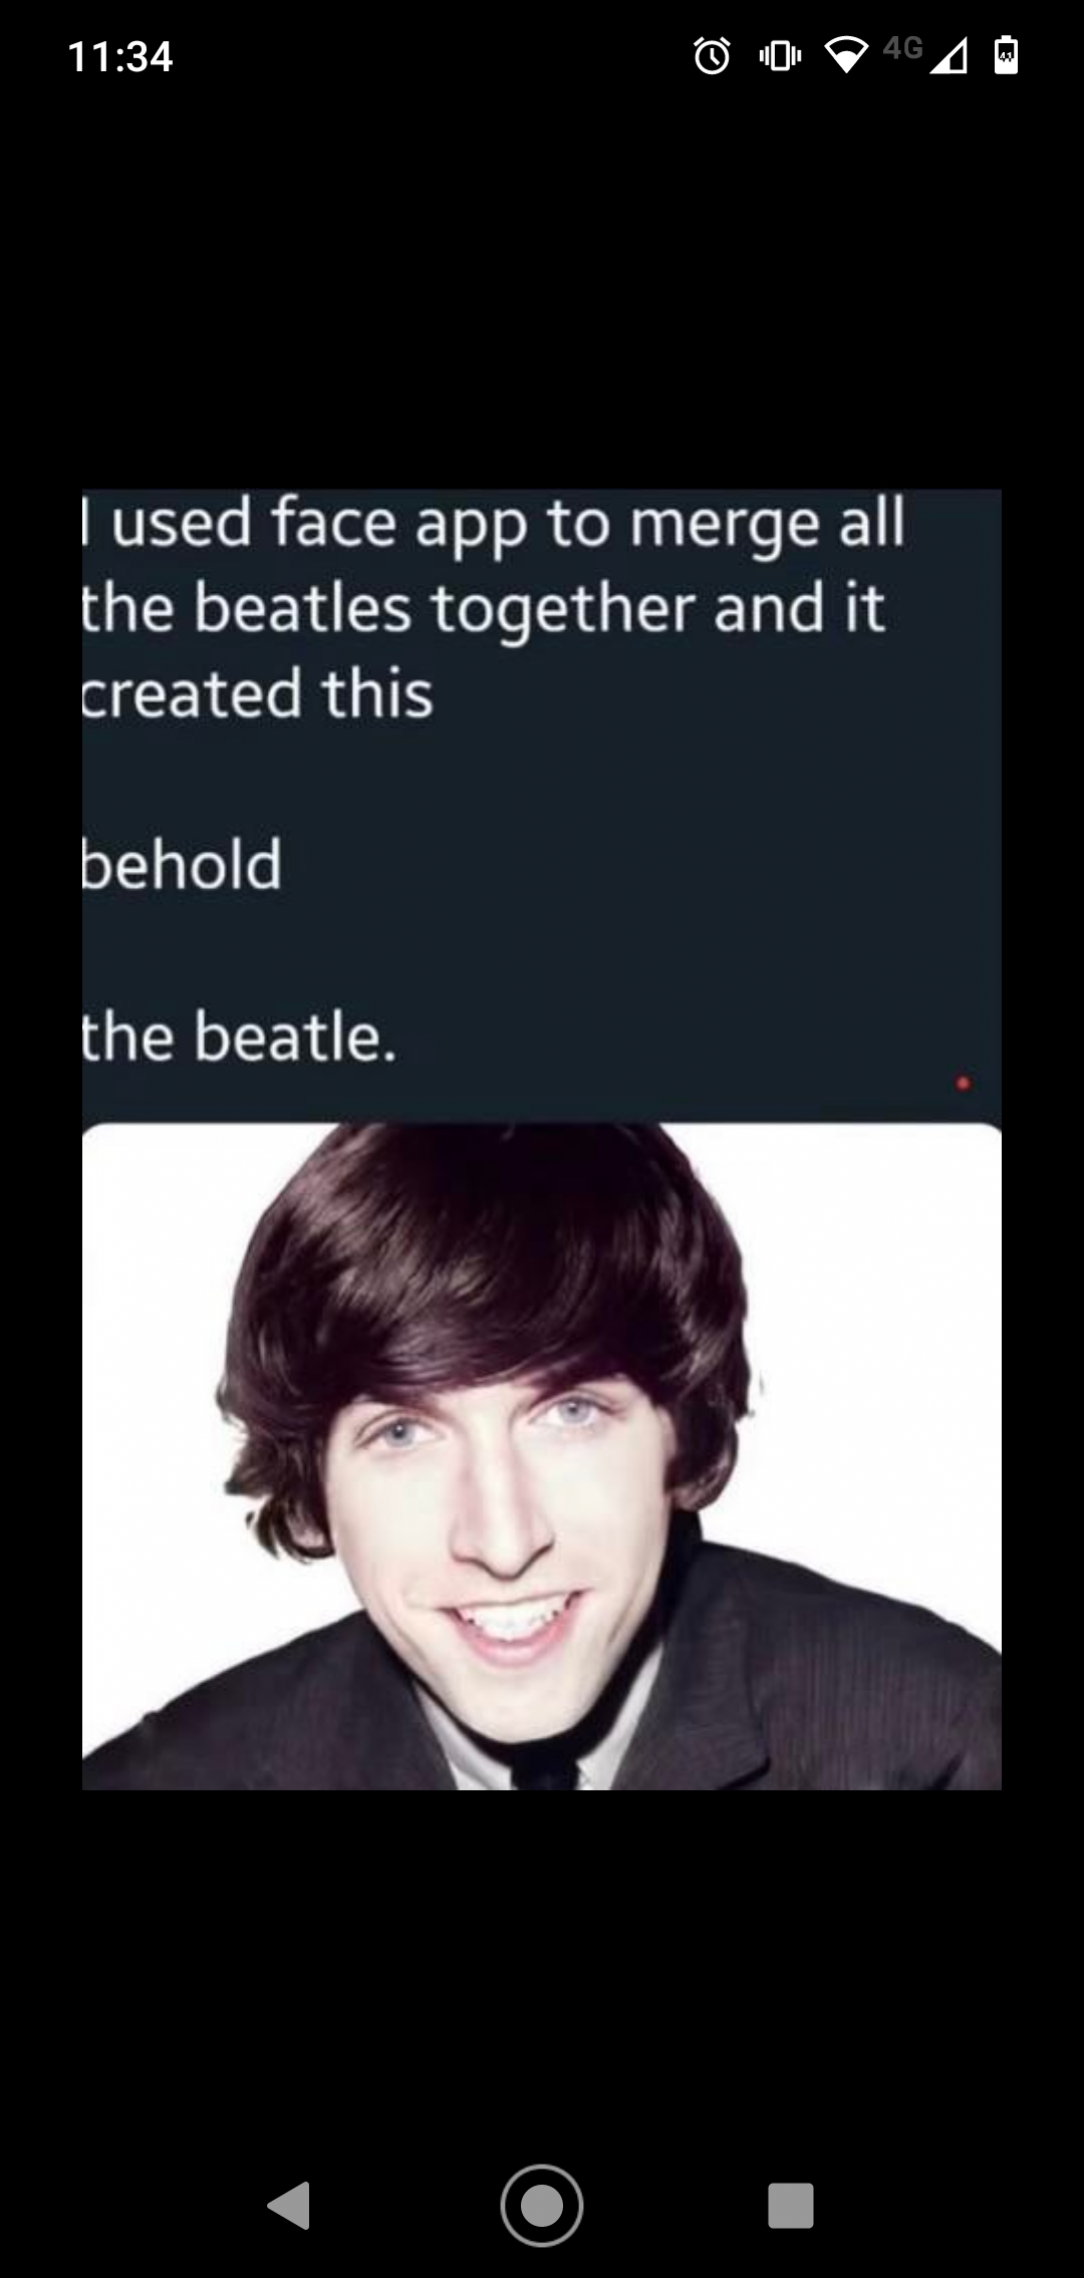 The beatle, master musician